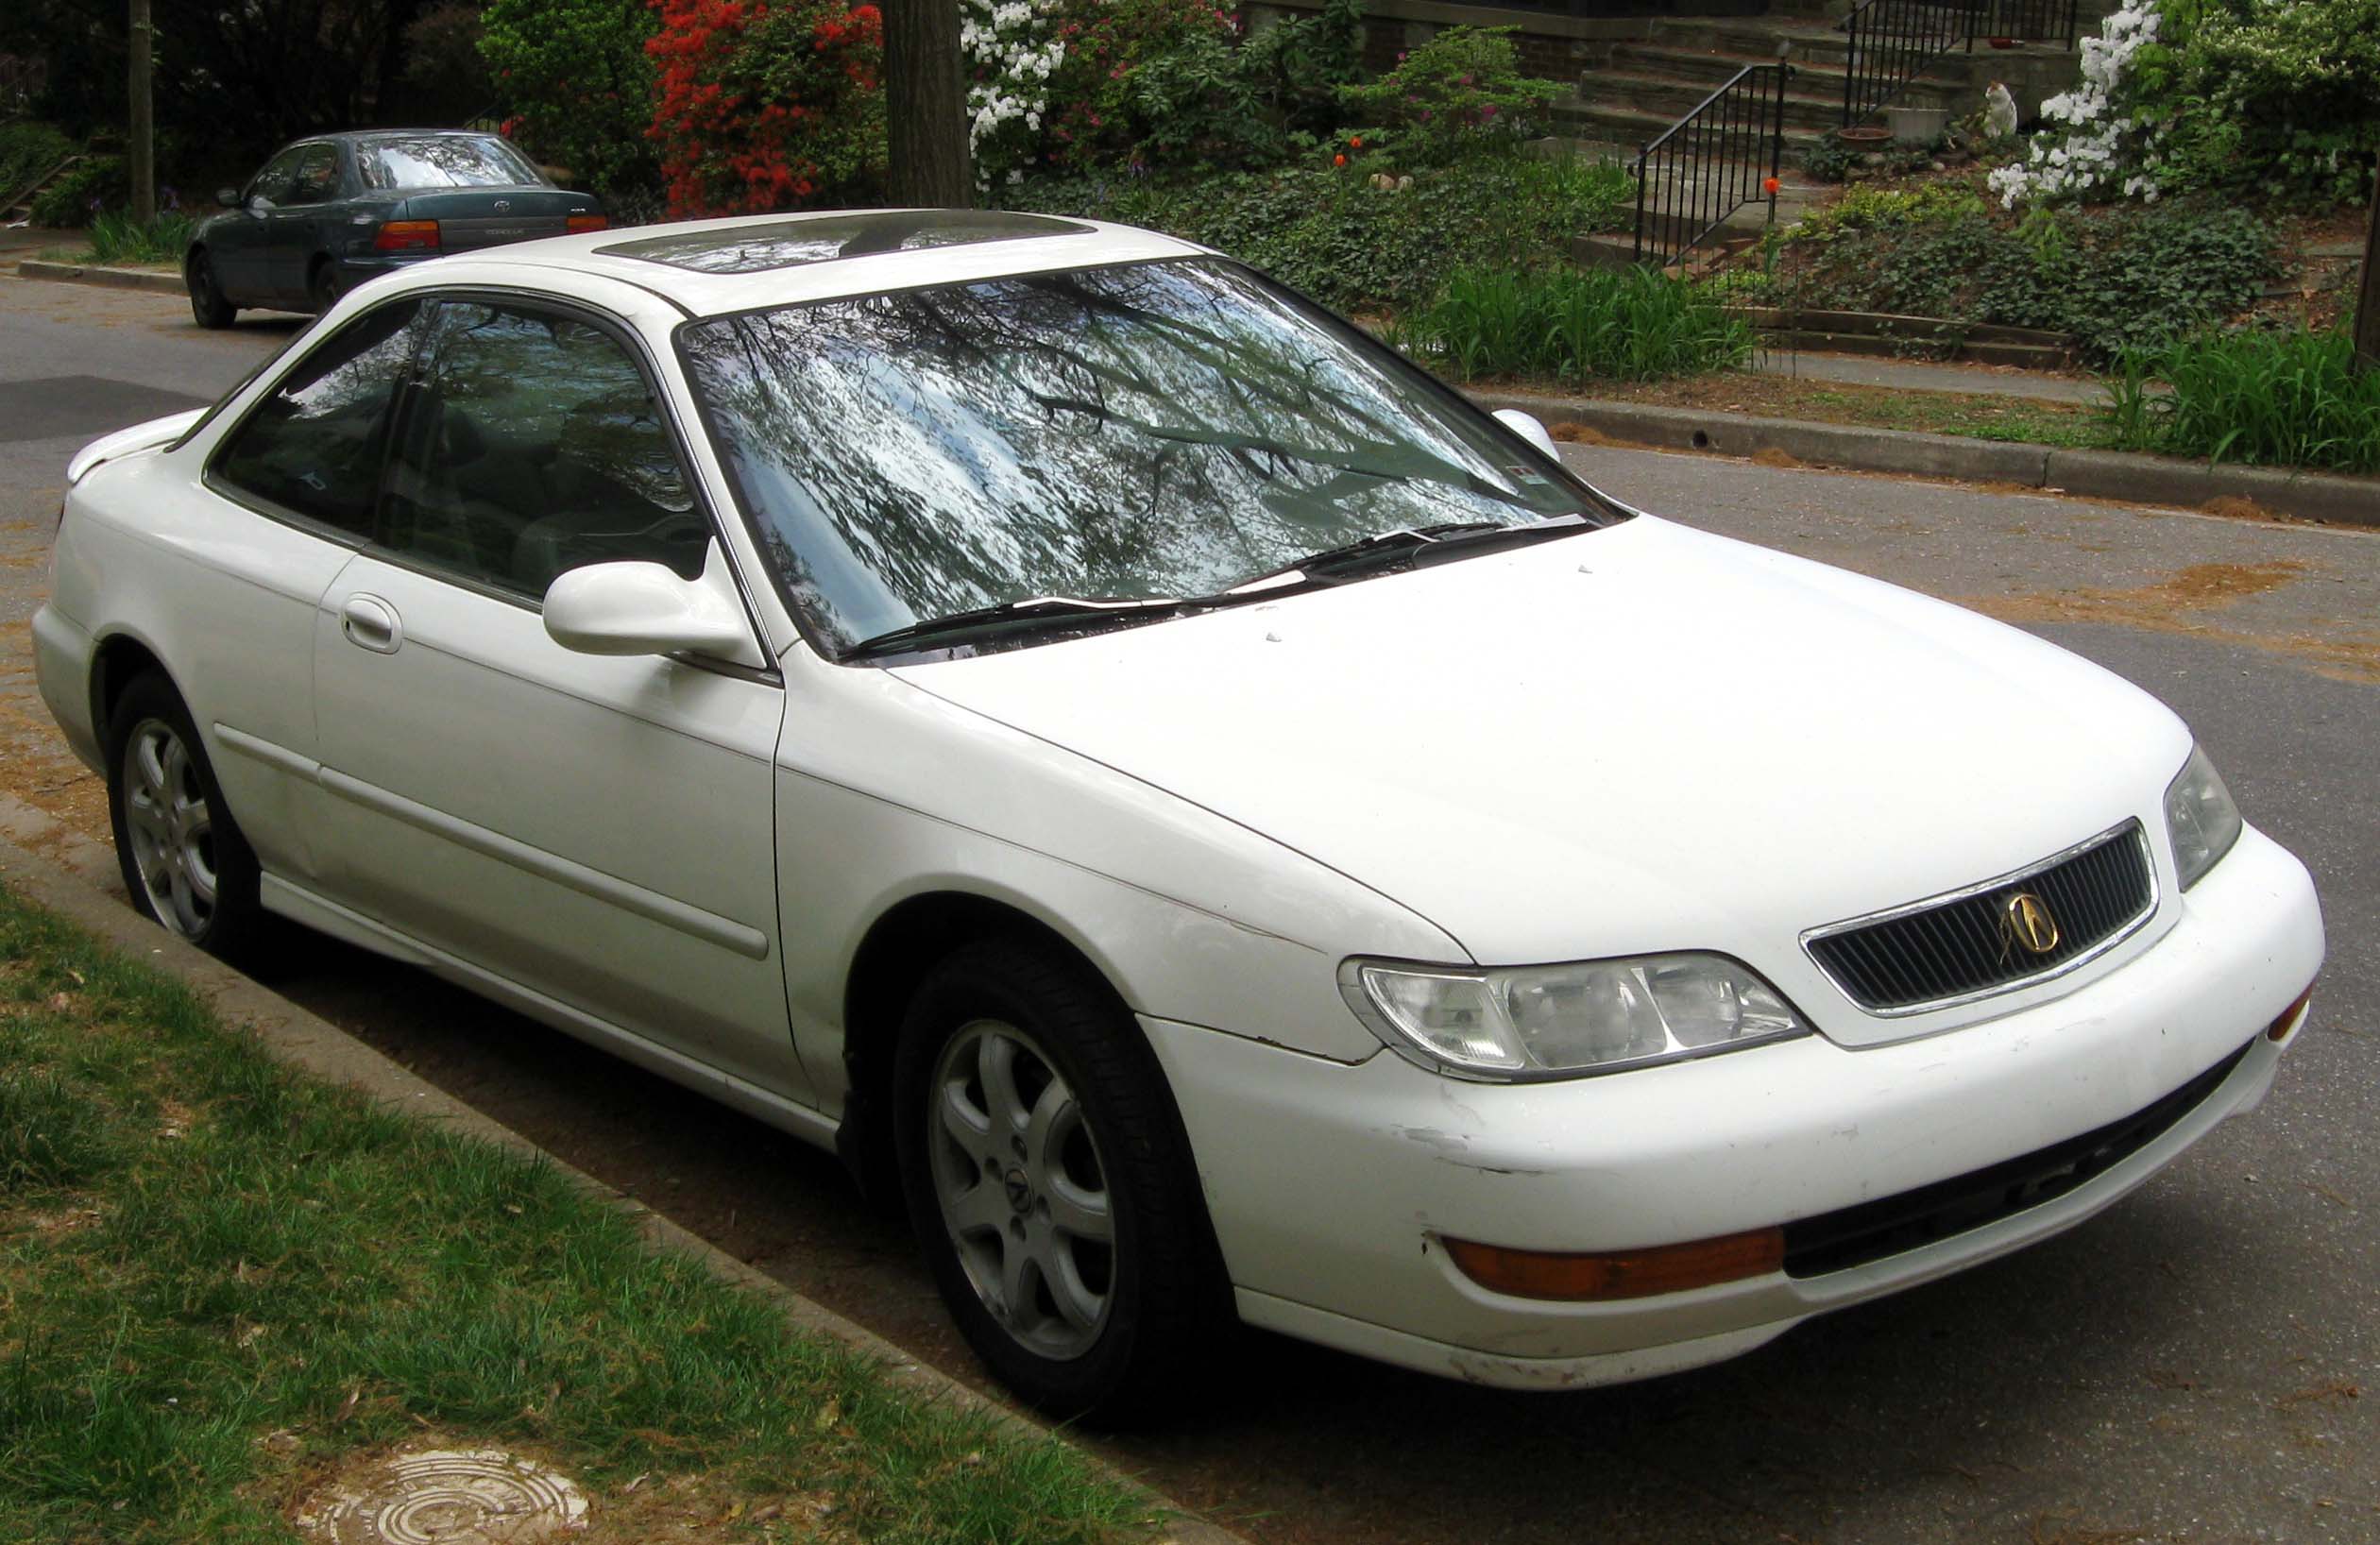 File:1998-1999 Acura CL -- 04-11-2012 1.JPG - Wikimedia Commons